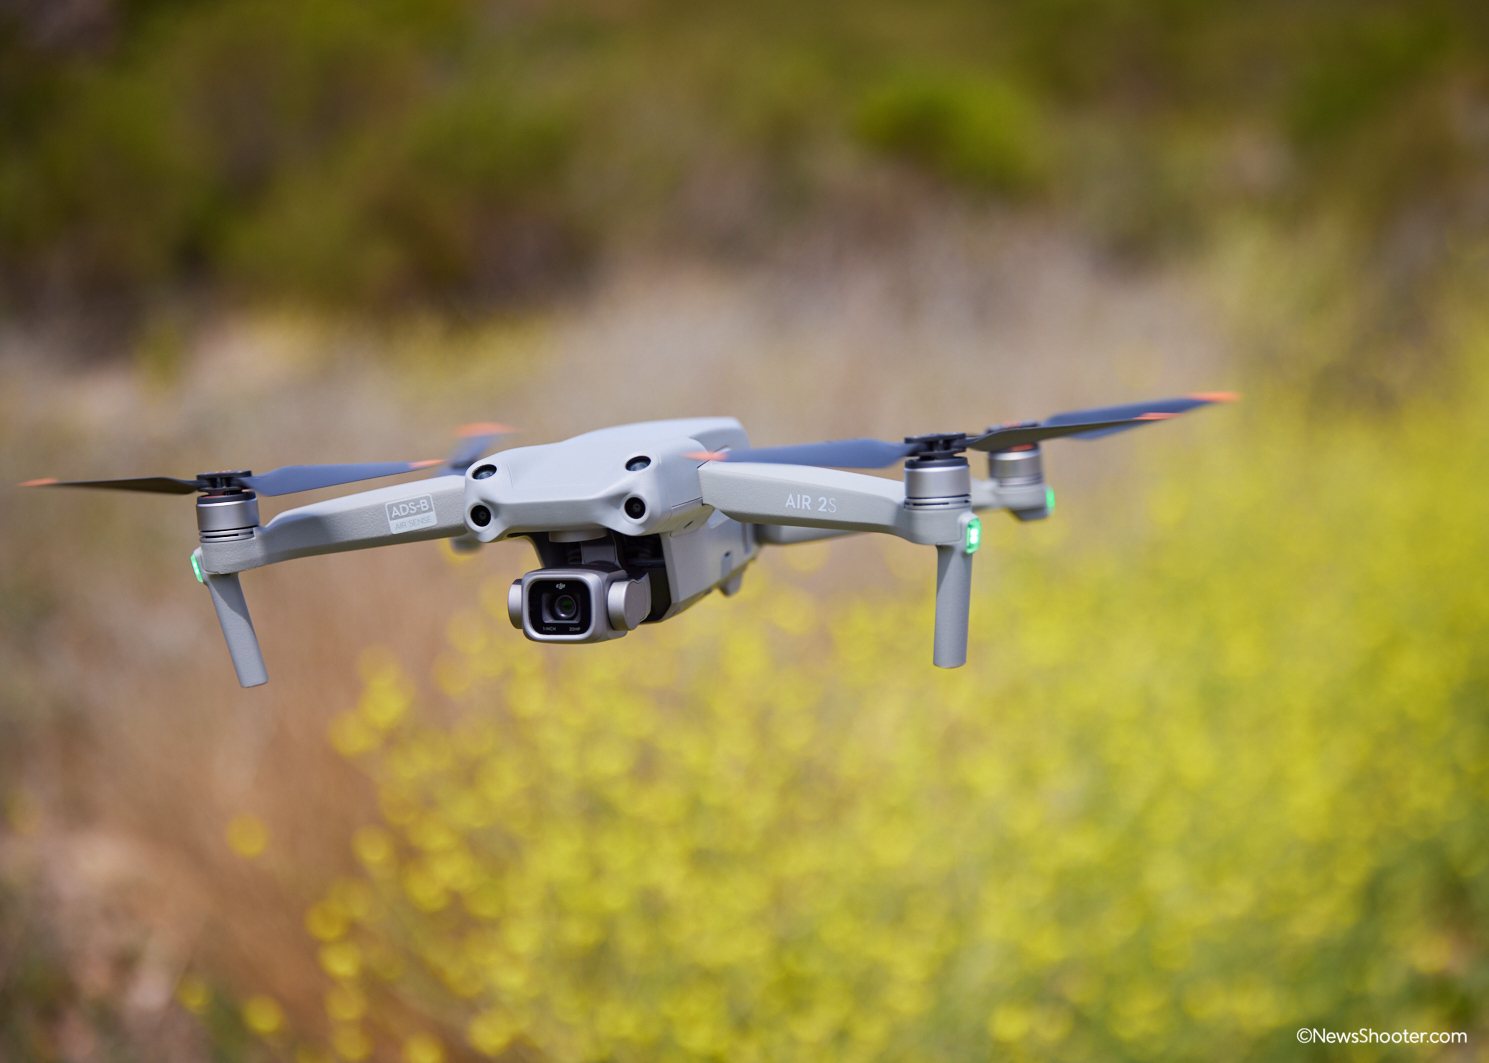 The Small UAV Coalition Were Happy to Confirm that the House of Representatives PASSED the FAA Reauthorization and Act of 2018.
